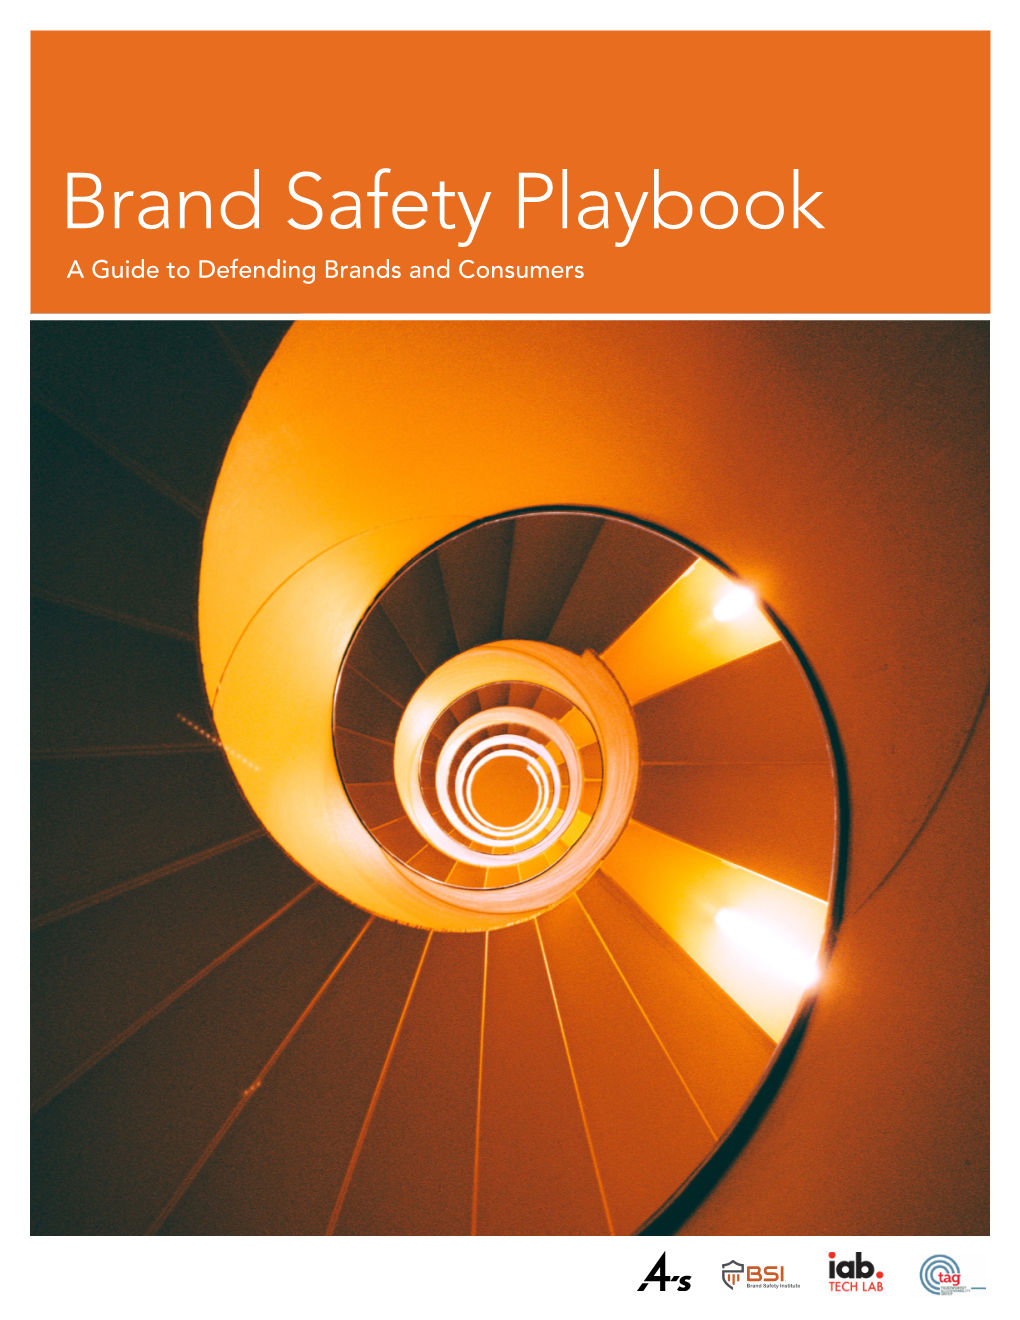 Brand Safety Playbook a Guide to Defending Brands and Consumers Contents